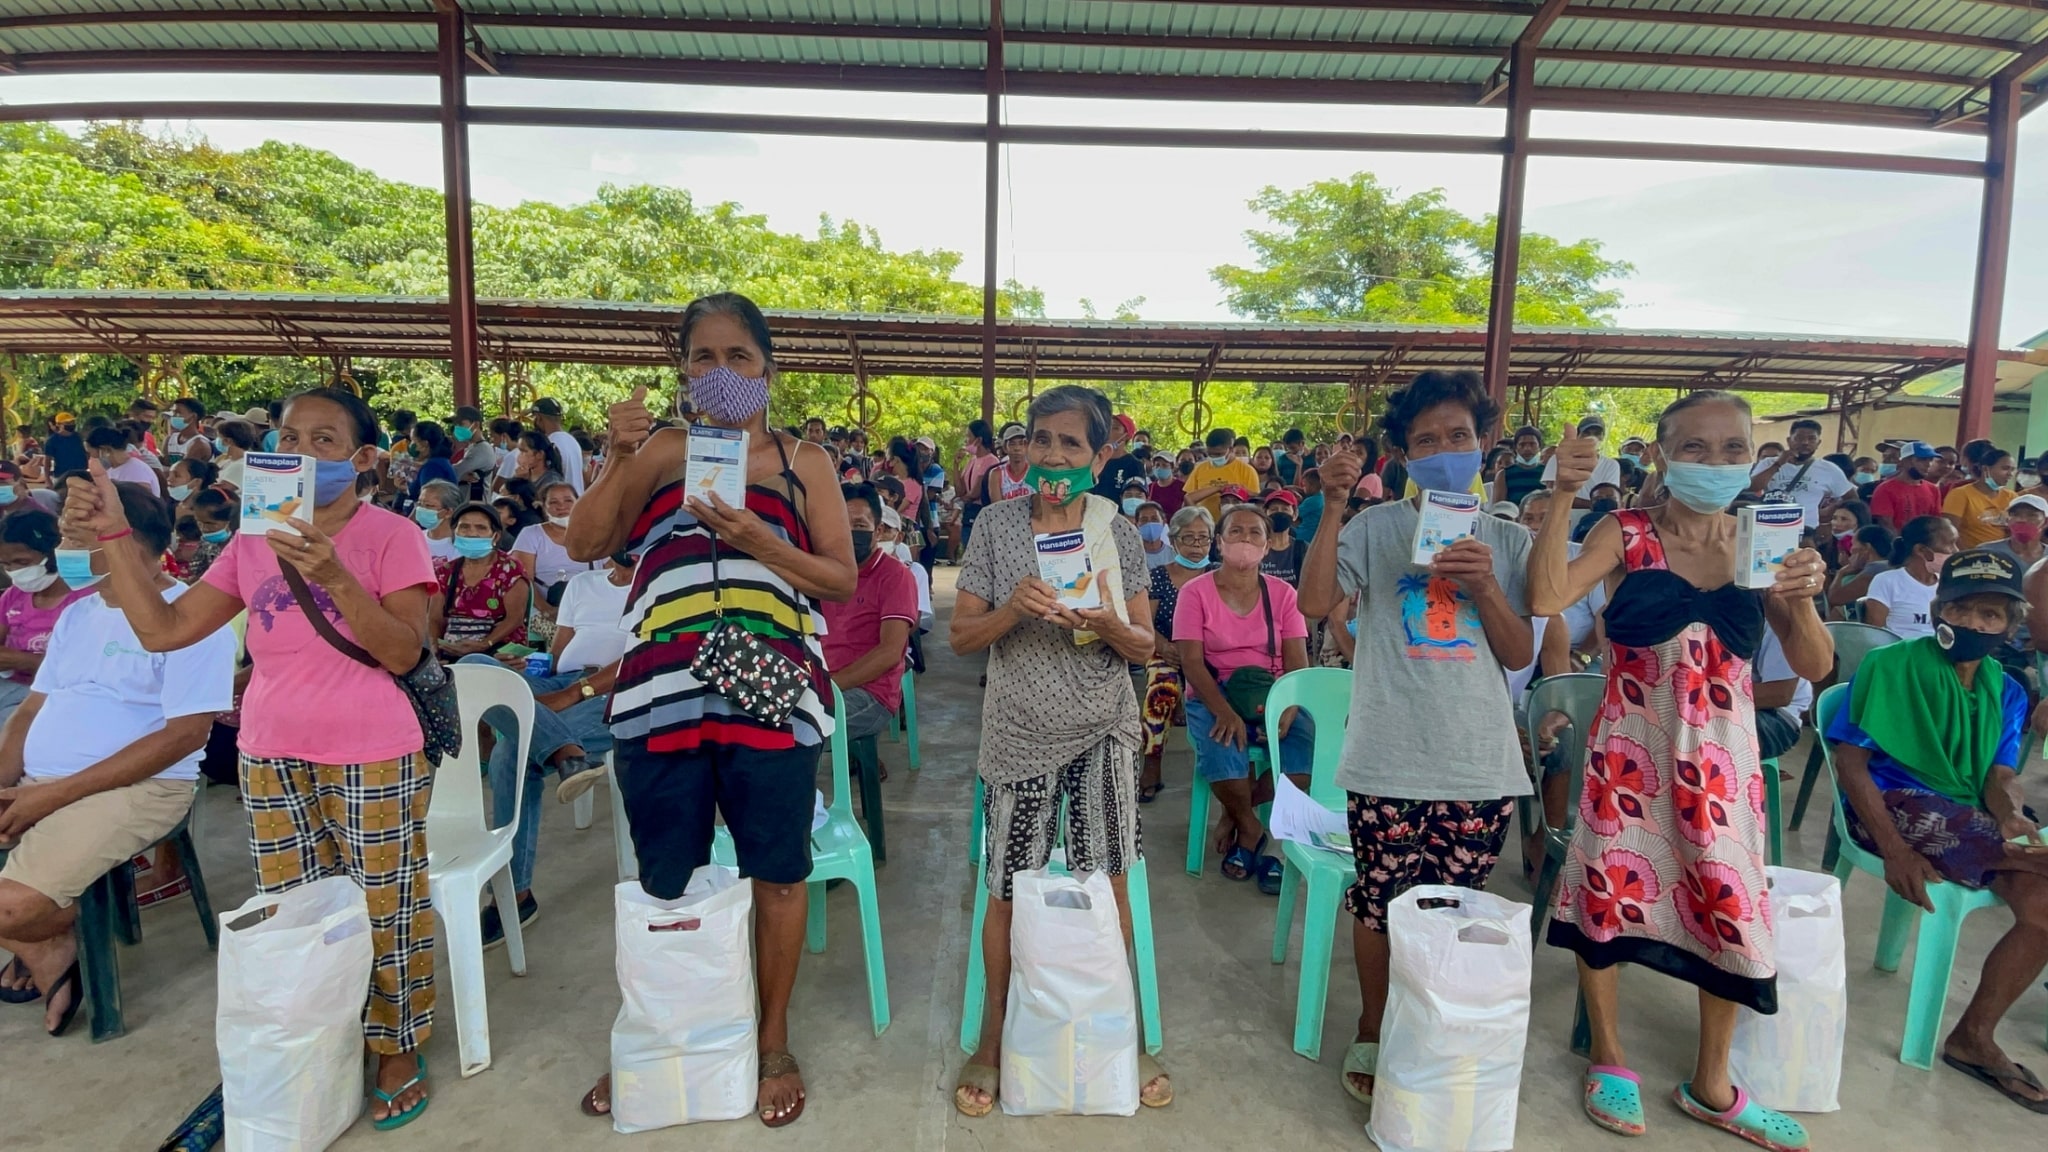 Tzu Chi Foundation sends relief to earthquake-hit Brgy. Layugan in Bucay and Brgy. Nagtipulan in Langailang, serving 430 and 338 families, respectively. Each family received 20 kilos of rice and a generous bag of groceries, including spaghetti pasta and sauce, condiments and other food items, and hygiene products. 【Photo by Matt Serrano】